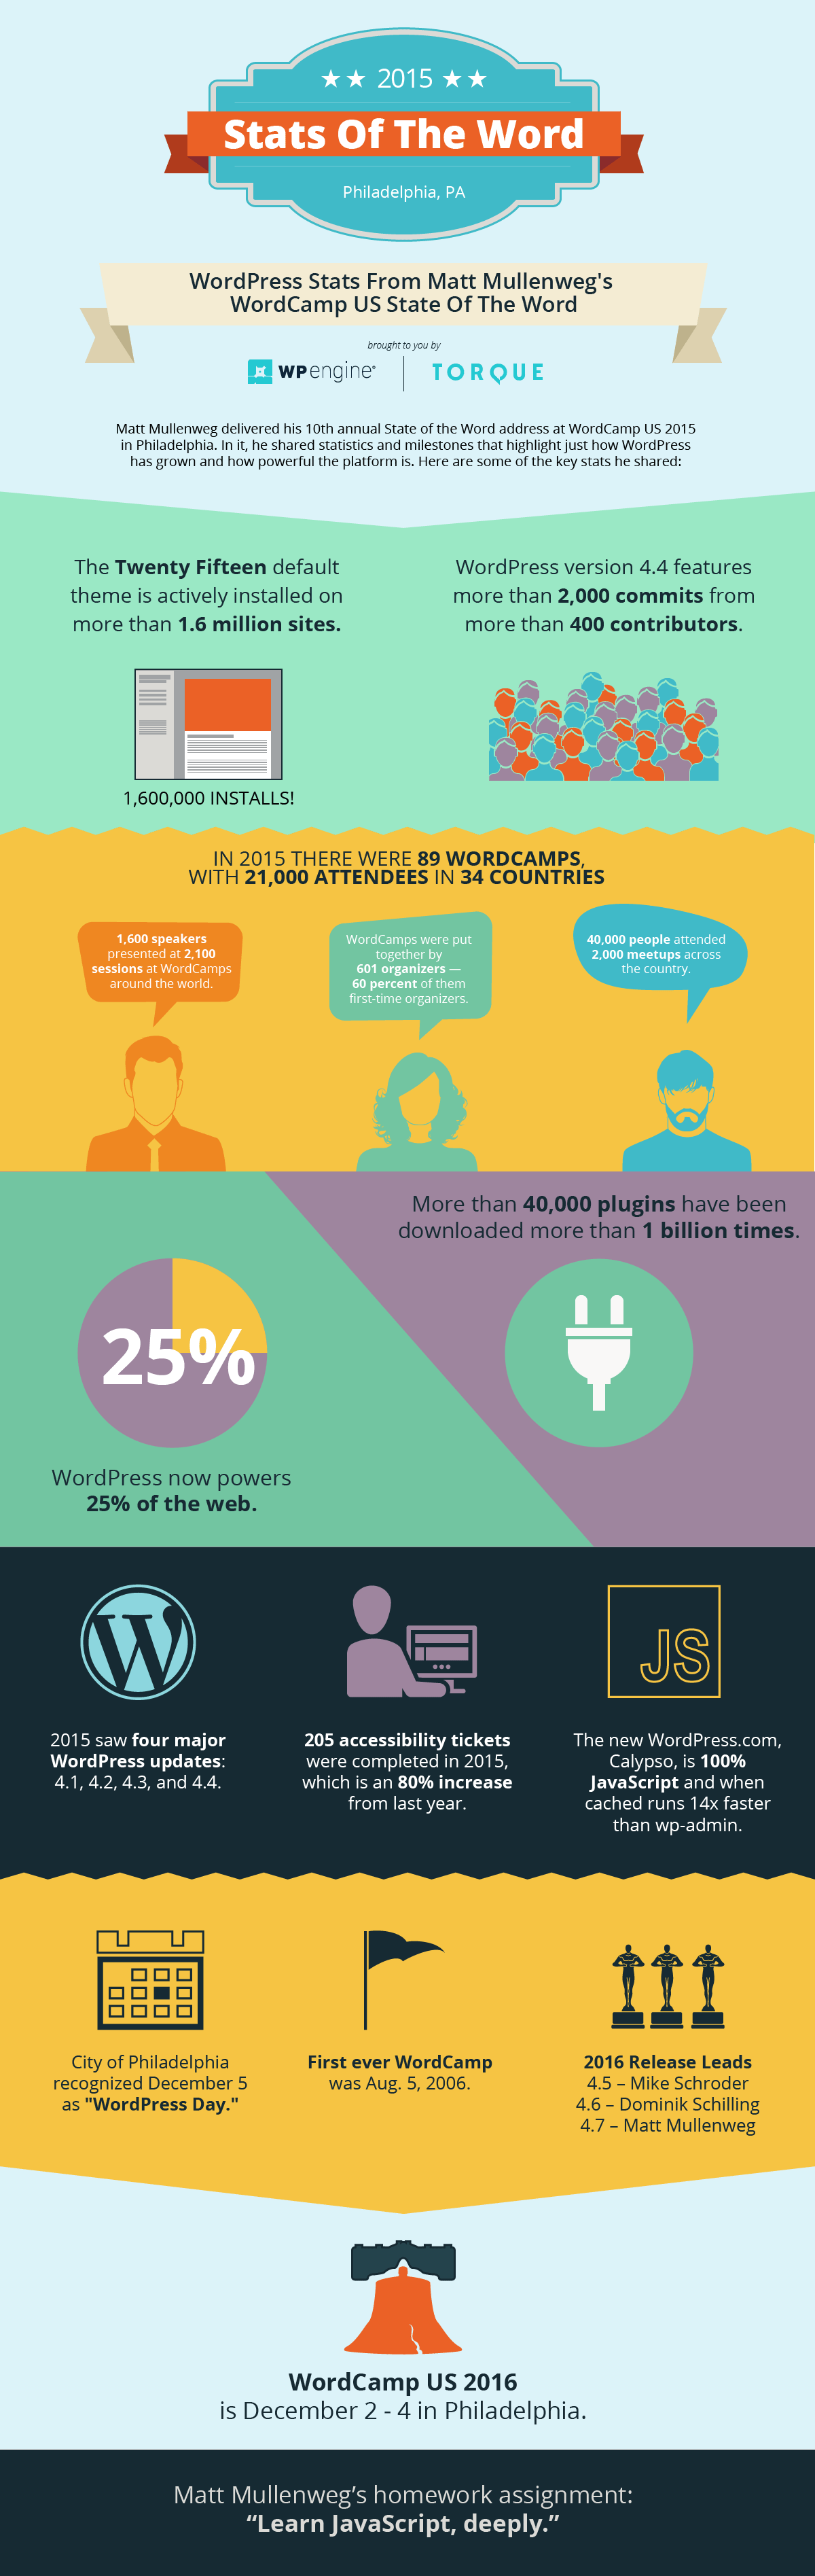 Stats of the Word - Infographic